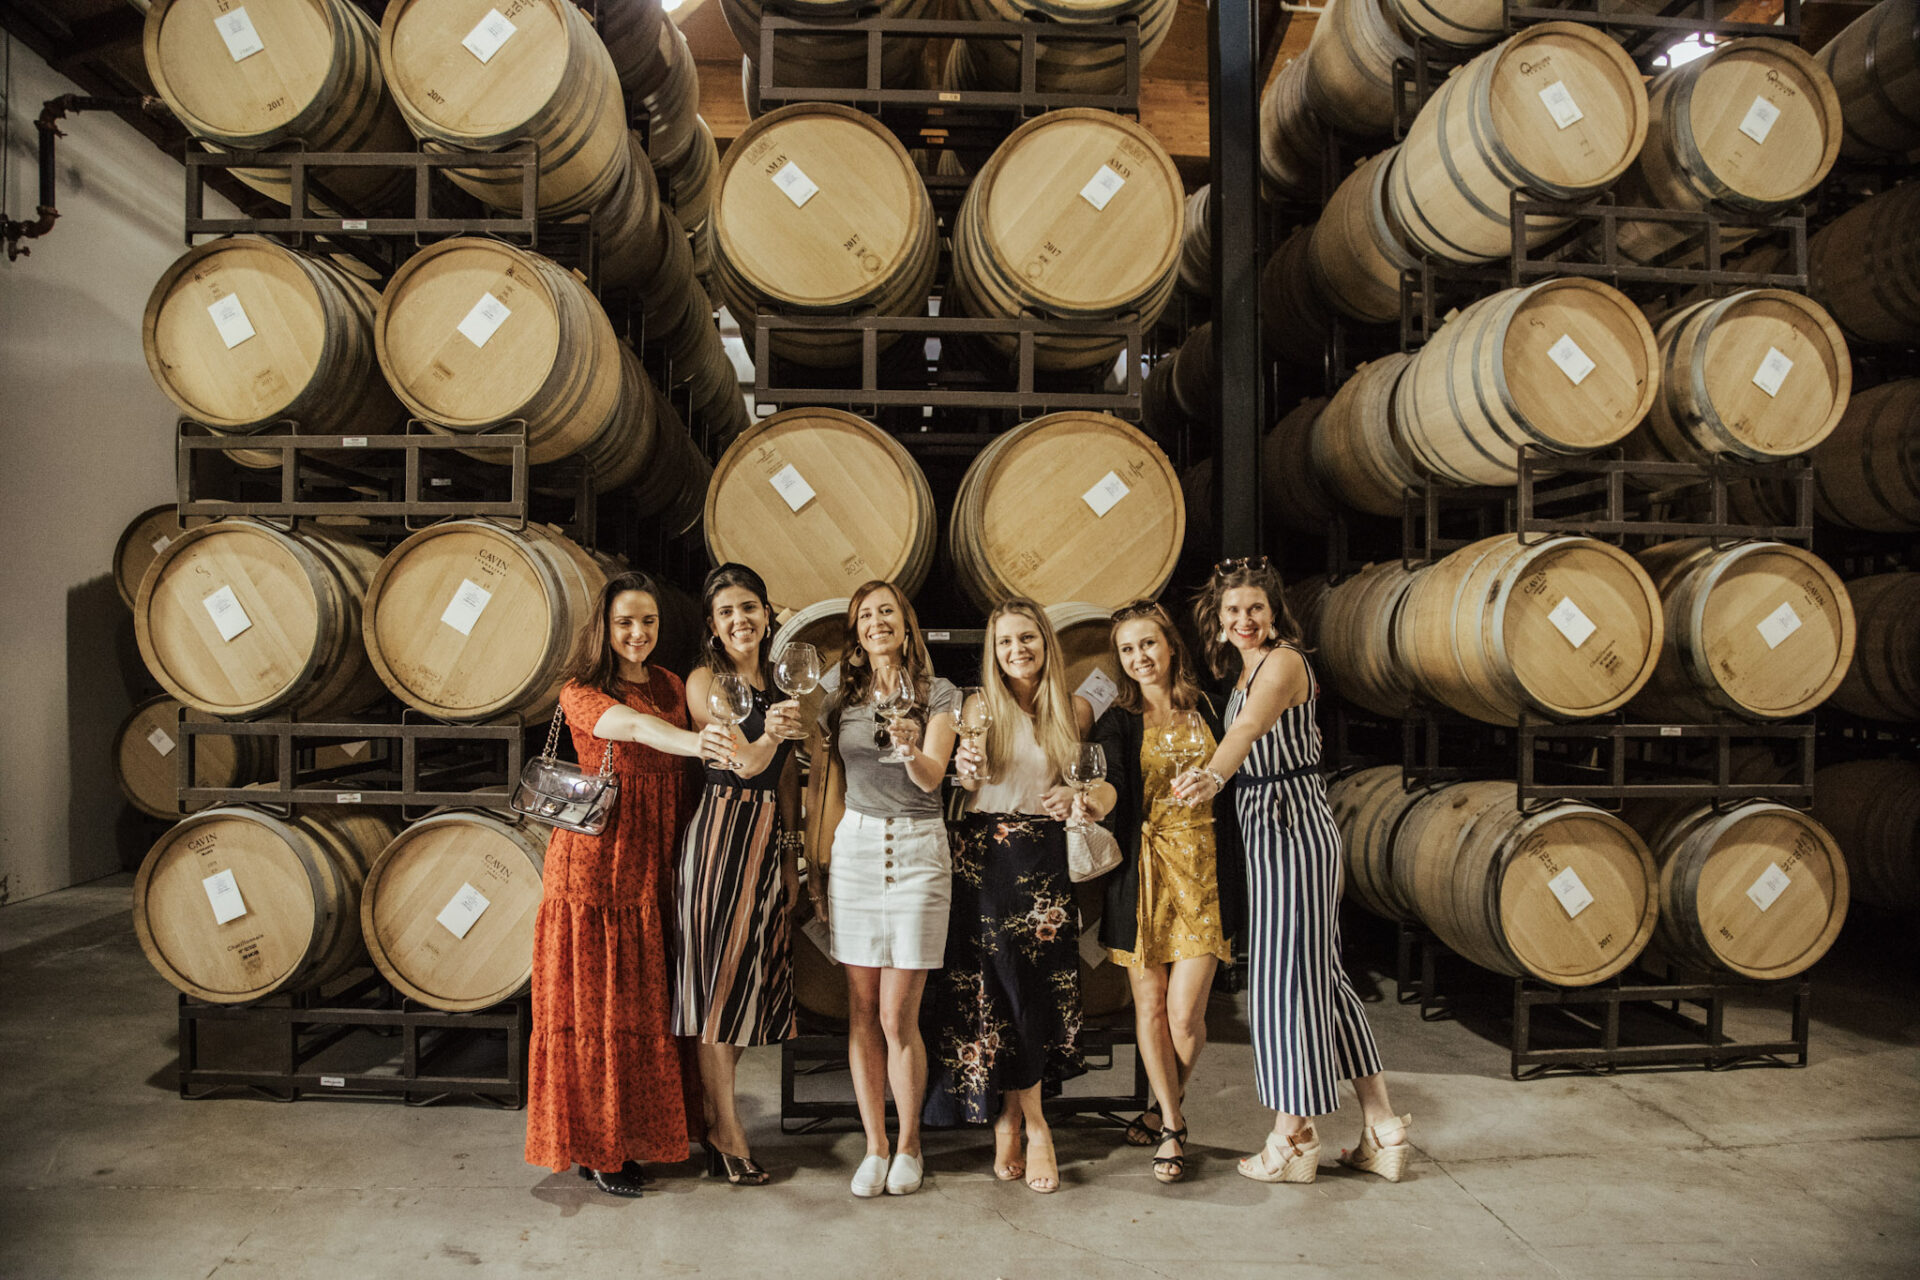 A group of women with oaked chardonnay in wine glasses in front of wine barrels